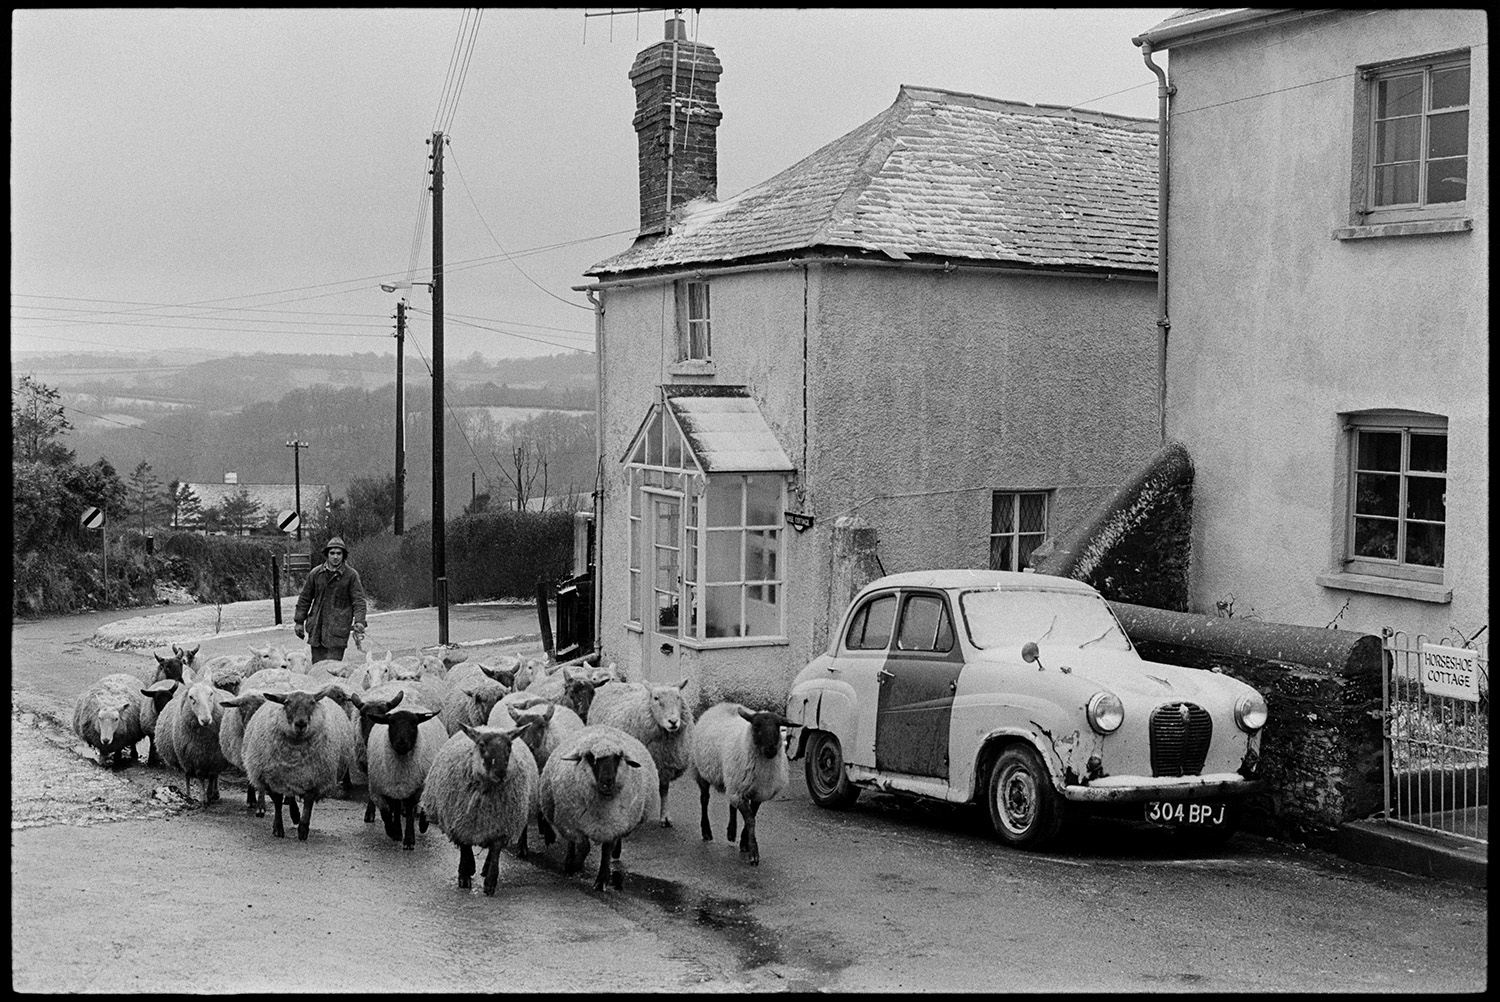 Man taking sheep through village. 
[Stephen Squire herding sheep along West Lane, Dolton, past cottages and a parked car.]